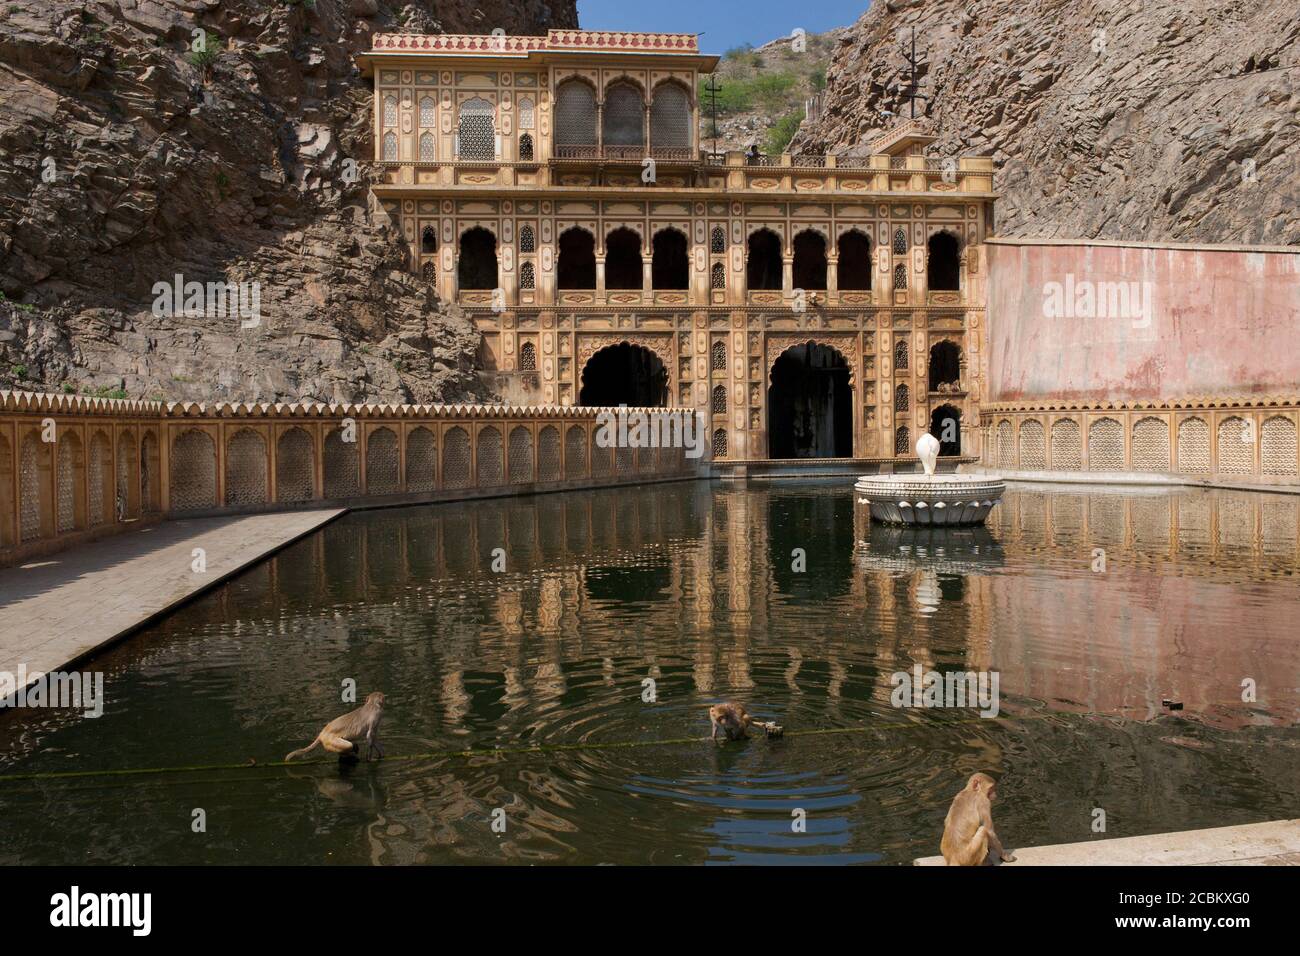 The Galta Temple (known as Monkey Temple) near Jaipur, Rajasthan, India Stock Photo